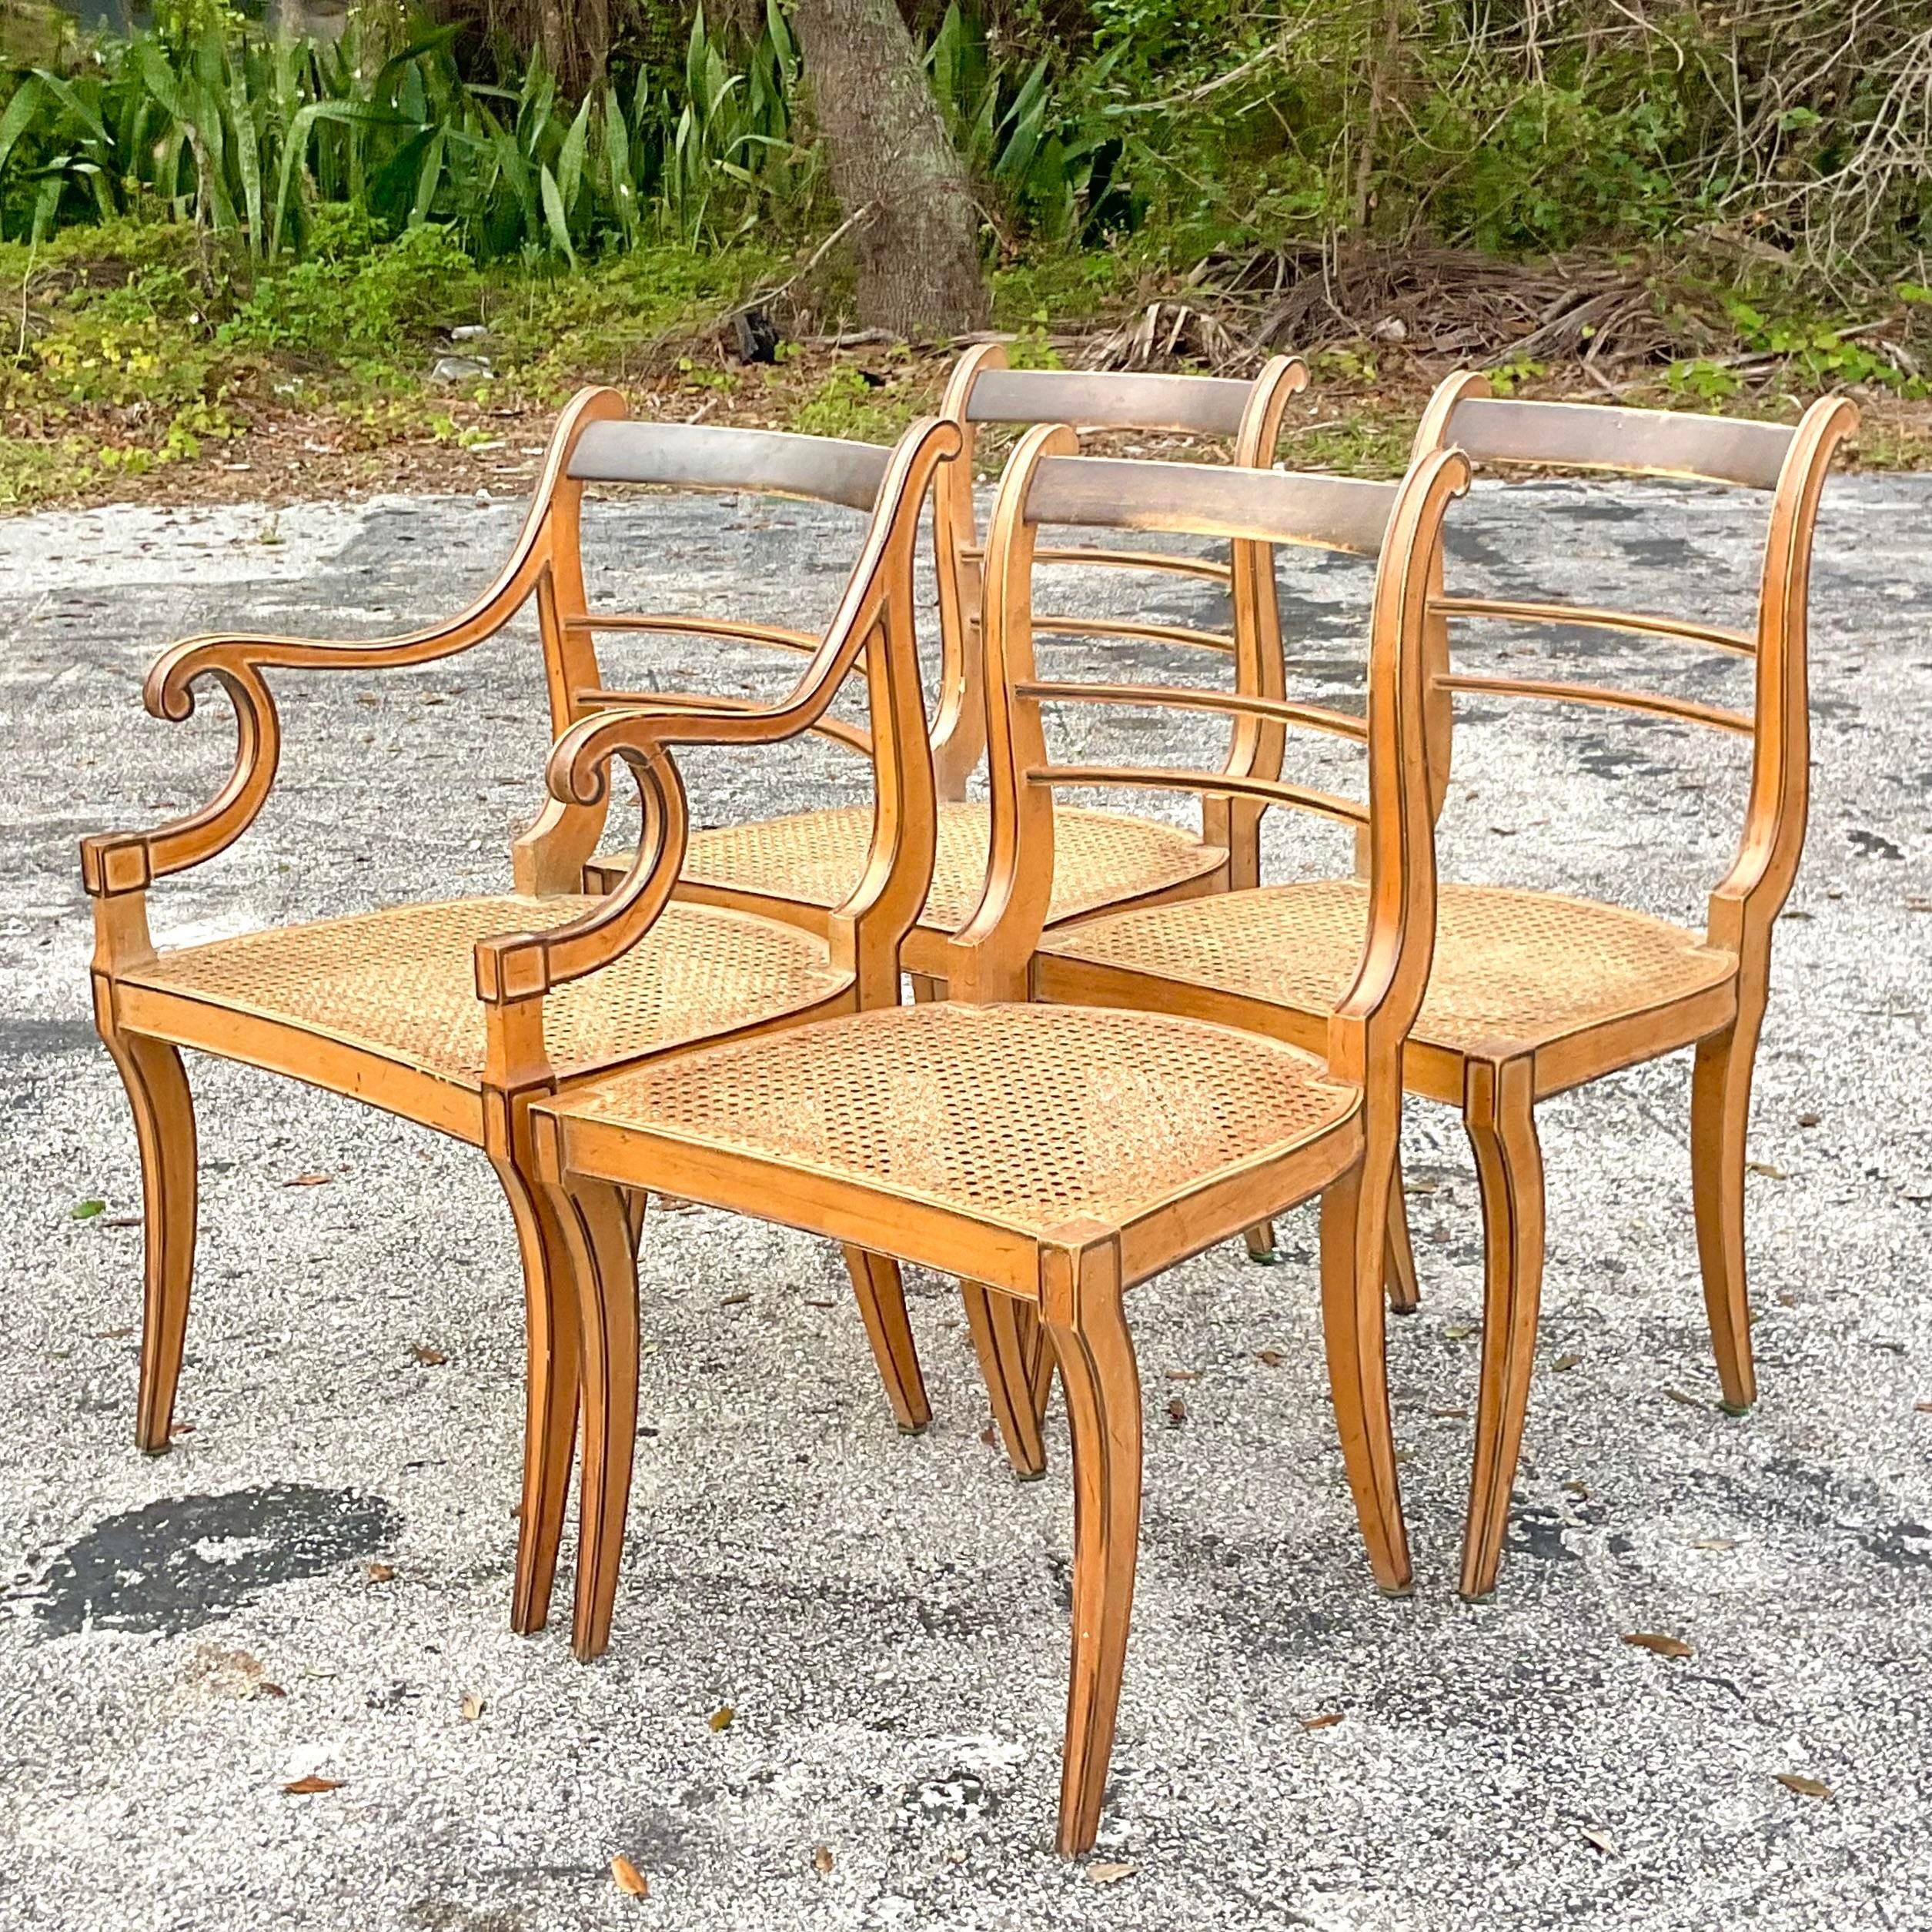 20th Century Vintage Boho Scroll Back Cane Dining Chairs - Set of Four For Sale